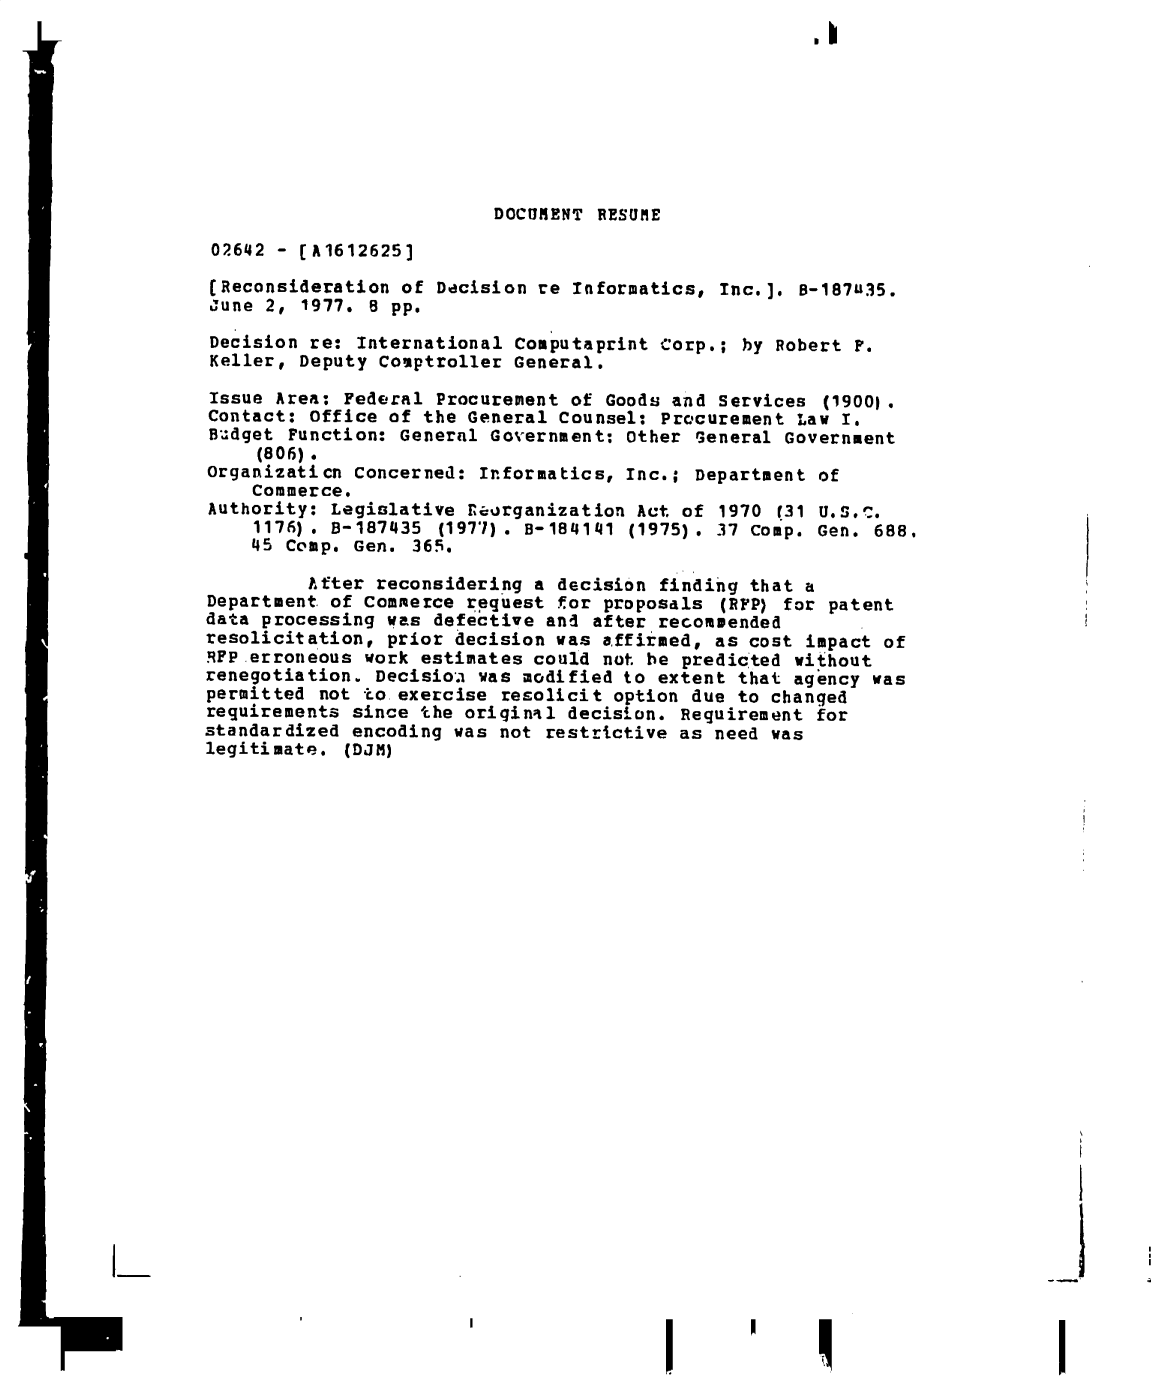 handle is hein.gao/gaobadeti0001 and id is 1 raw text is: I


I


DOCUMENT RESUME


02642 e (A1612625]


(Reconsideration of  Decision re Informatics, Inc.].
June 2, 1977. 8 pp.


Decision re: International
Keller, Deputy comptroller


8-187U35.


Computaprint Corp.;  by Robert P.
General,


Issue Area:  Federal Procurement of Goods and  services (19001.
Contact: Office  of the General Counsel: Procurement  Law I.
Budget  Function: General Government: Other  General Government
     (806).
Organizaticn  concerned: Informatics, Inc.;  Department of
    Commerce.
Authority: Legislative   eaorganization Act of 1970 (31 U.S..
    1176).  -187435  (1977). B-184141  (1975). 37 Comp. Gen. 688,
    45 Comp.  Gen. 365.

         After  reconsidering a decision finding  that a
Department of commerce  request for proposals  (RFP) for patent
data processing  was defective and after recommended
resolicitation,  prior decision was affirmed, as cost  impact of
RFP erroneous  work estimates could not be predicted  without
renegotiation.  Decisioa was modified to extent that  agency was
permitted not to  exercise resolicit option due to changed
requirements since  the oriqinal decision. Requirement  for
standardized encoding  was not restrictive as need was
legitimate.  (DJM)


I-


I


I


I


I


I


----a ,


I


